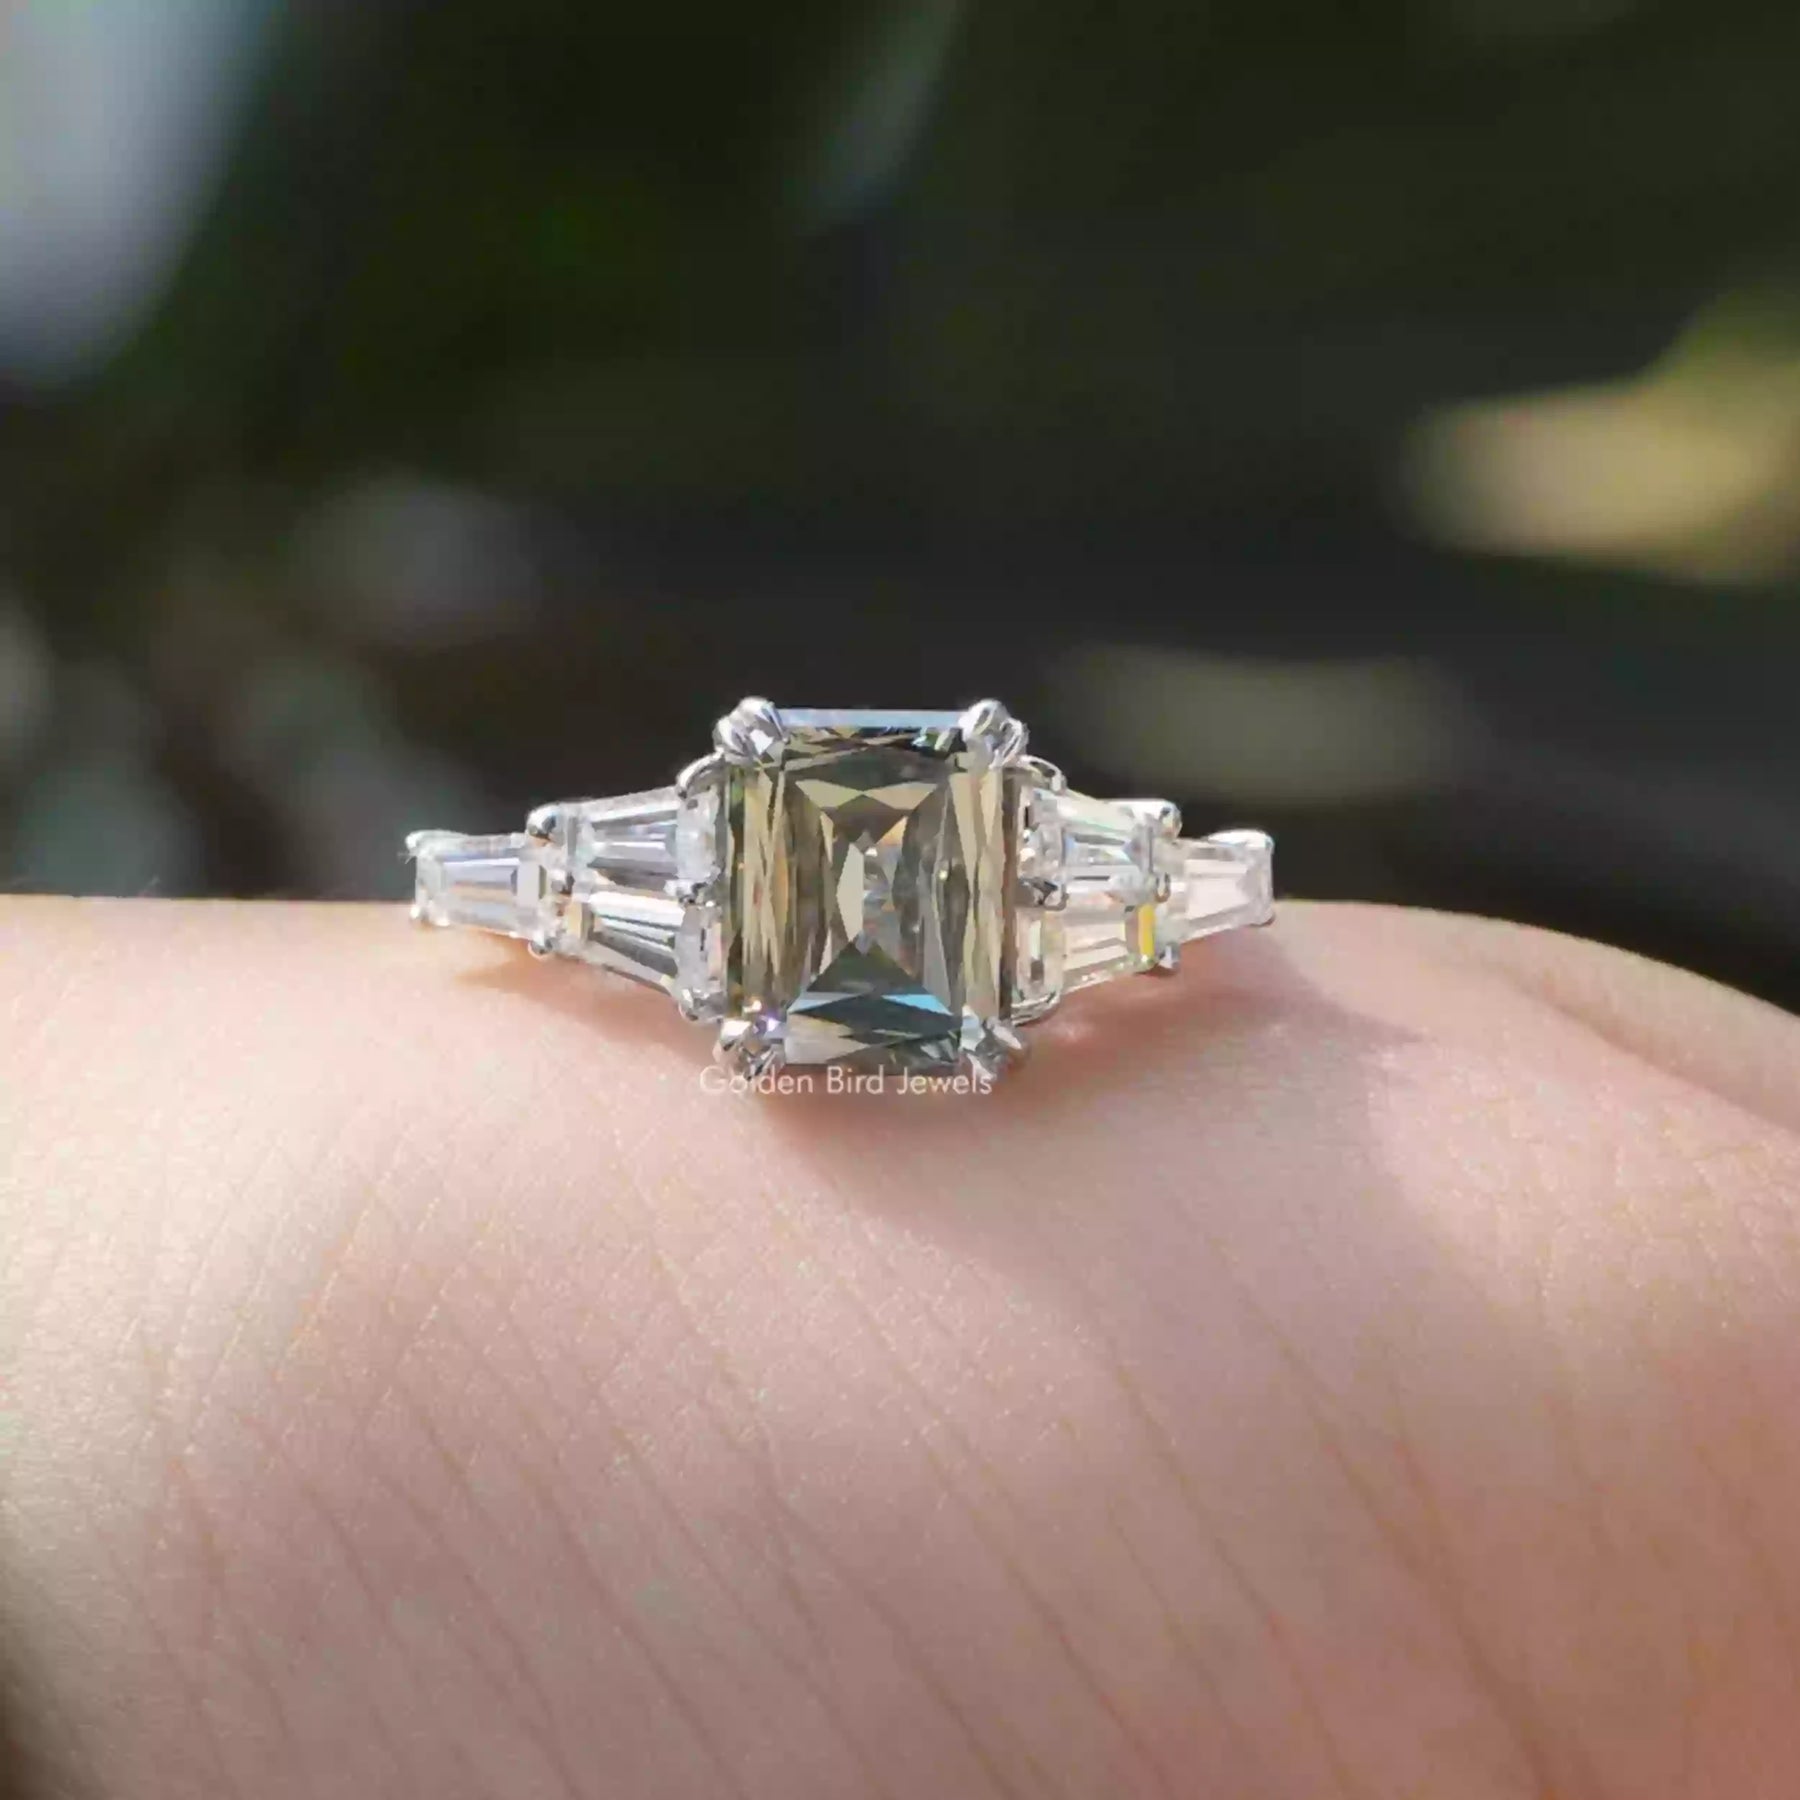 [Criss cut double prong engagement ring in 14k white gold]-[Golden Bird Jewels]